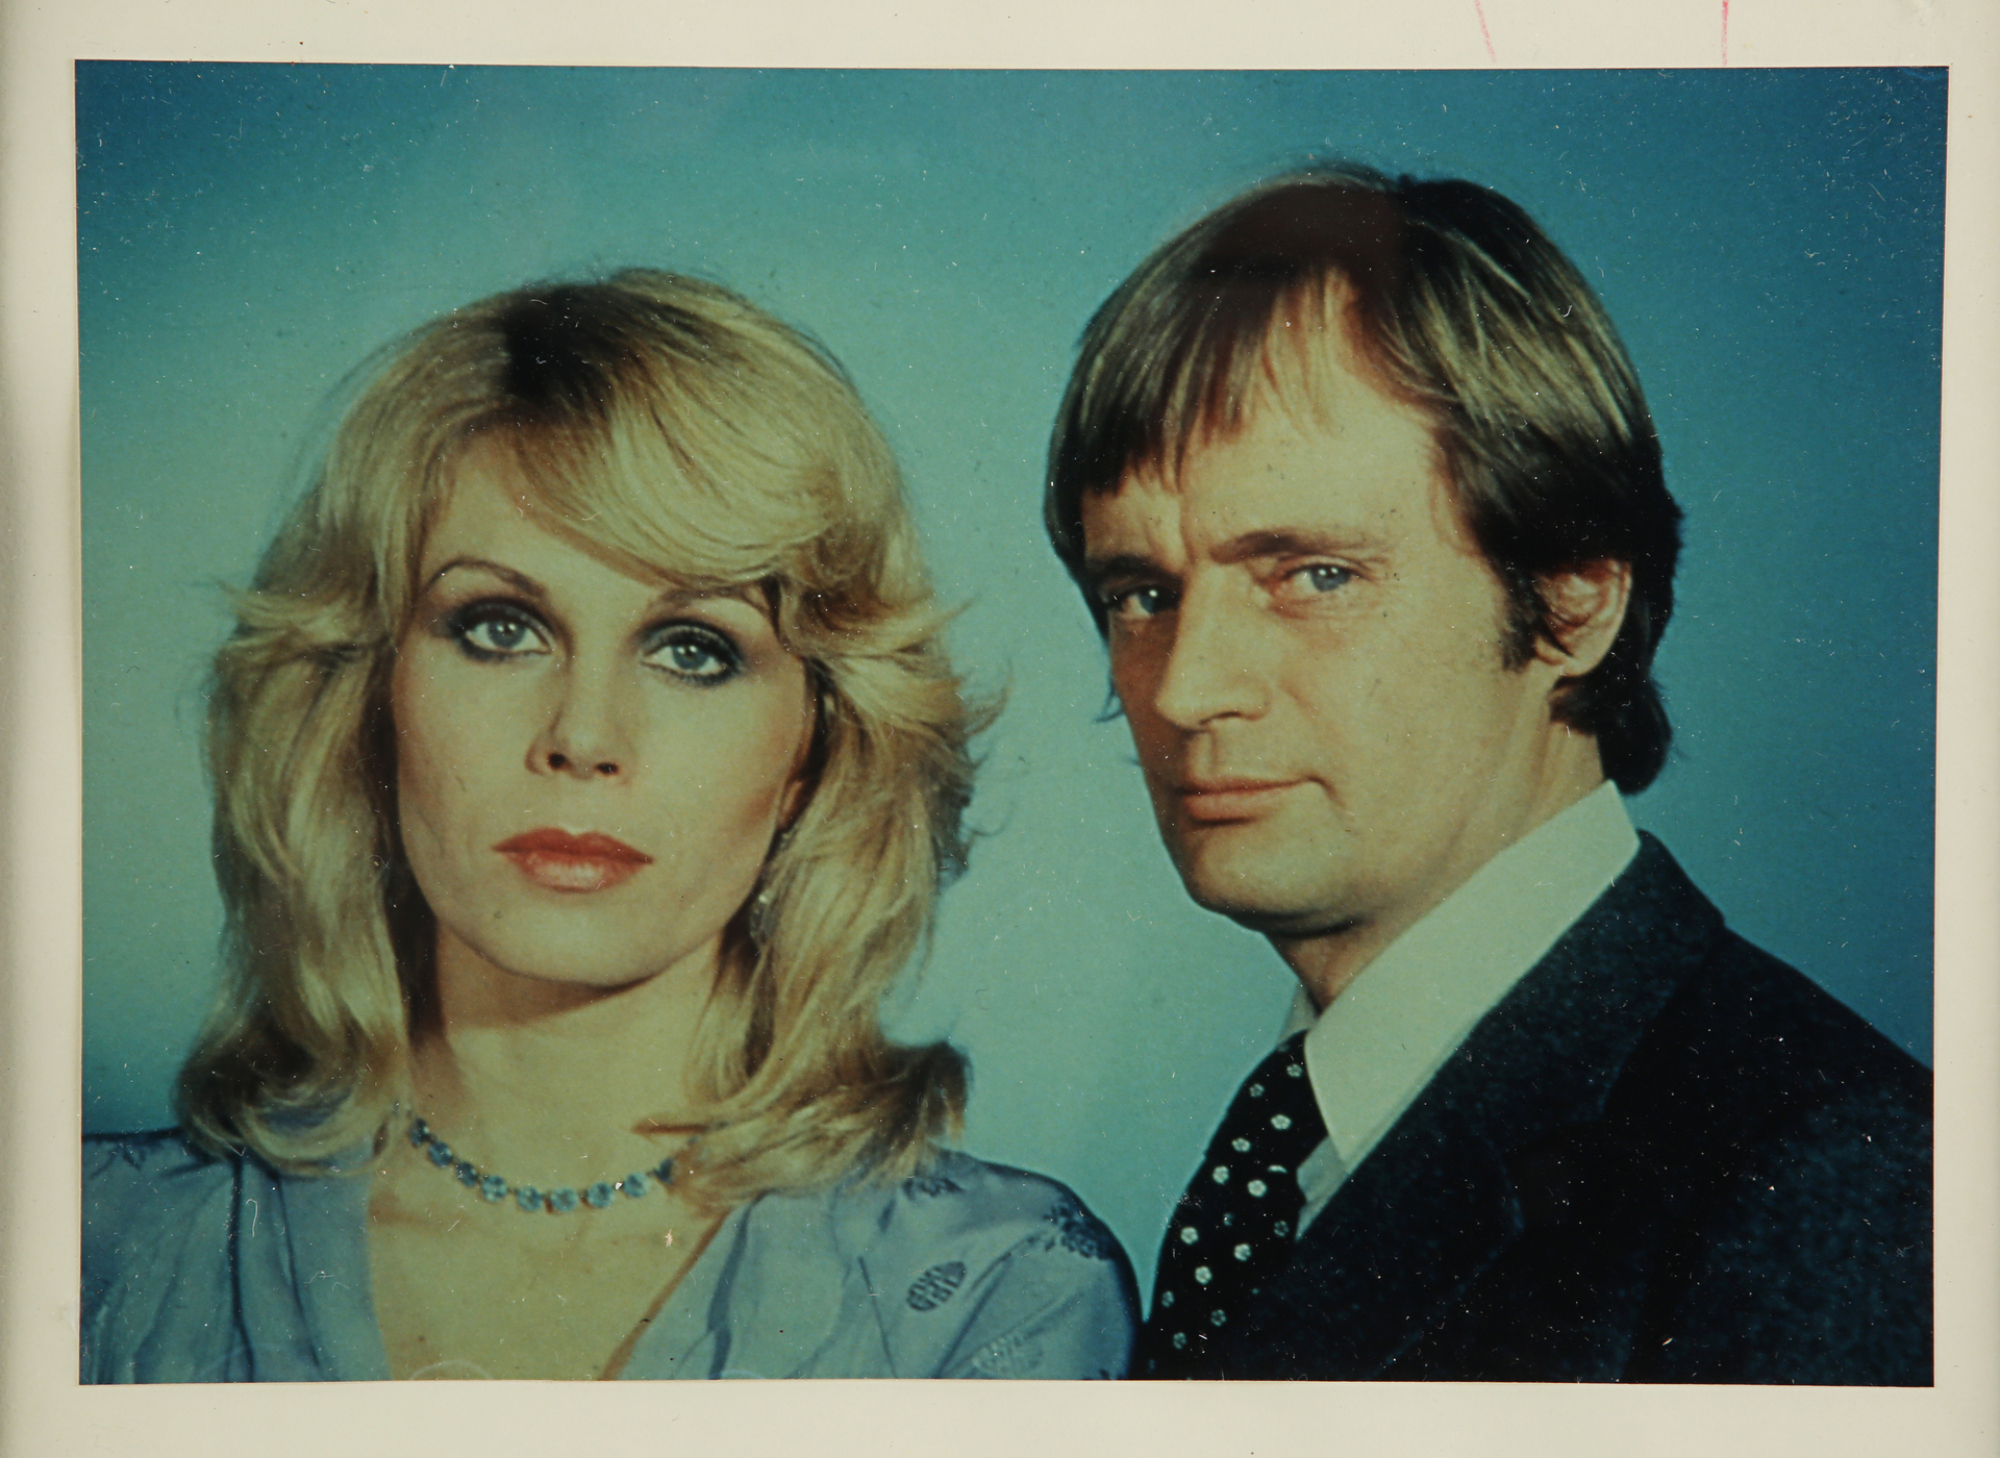 Lot #846 - SAPPHIRE AND STEEL (T.V. SERIES, 1979 - 1982) - Sapphire's ...